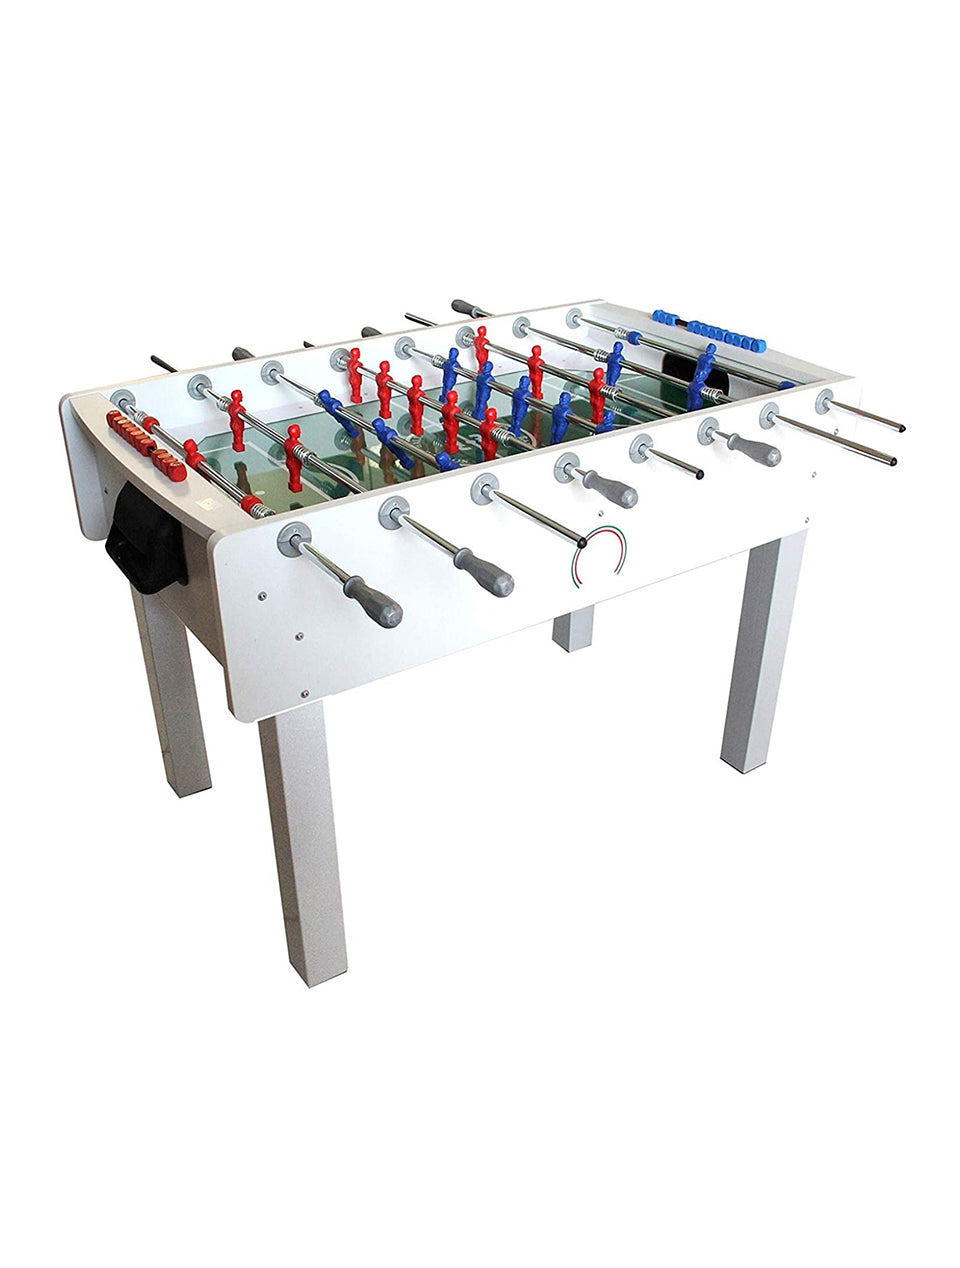 FAS Foosball Table Match 0CAL0025